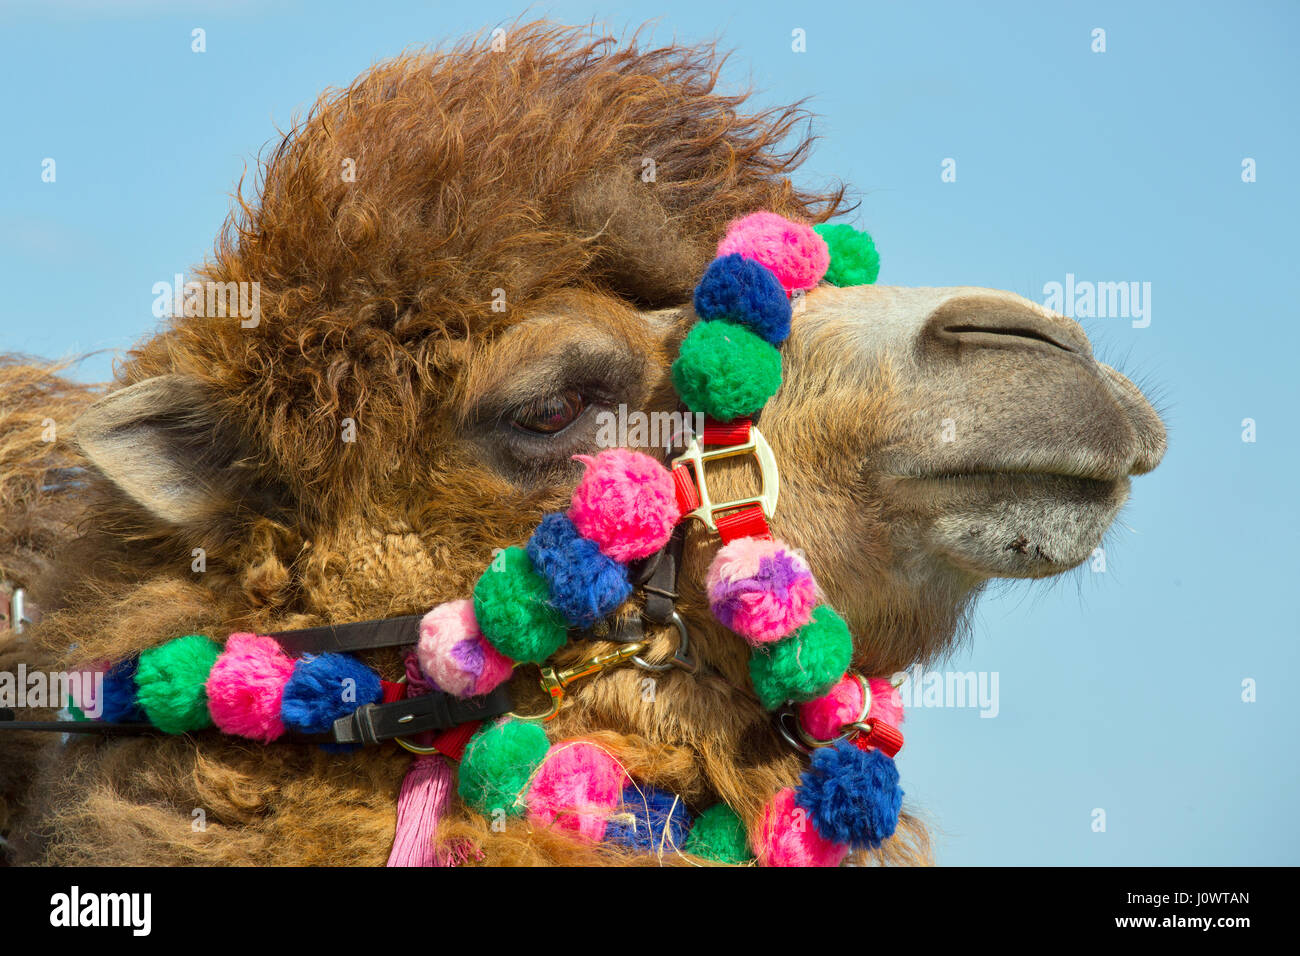 Domesticated Bactrian camels Camelus bactrianus used for camel racing Stock Photo